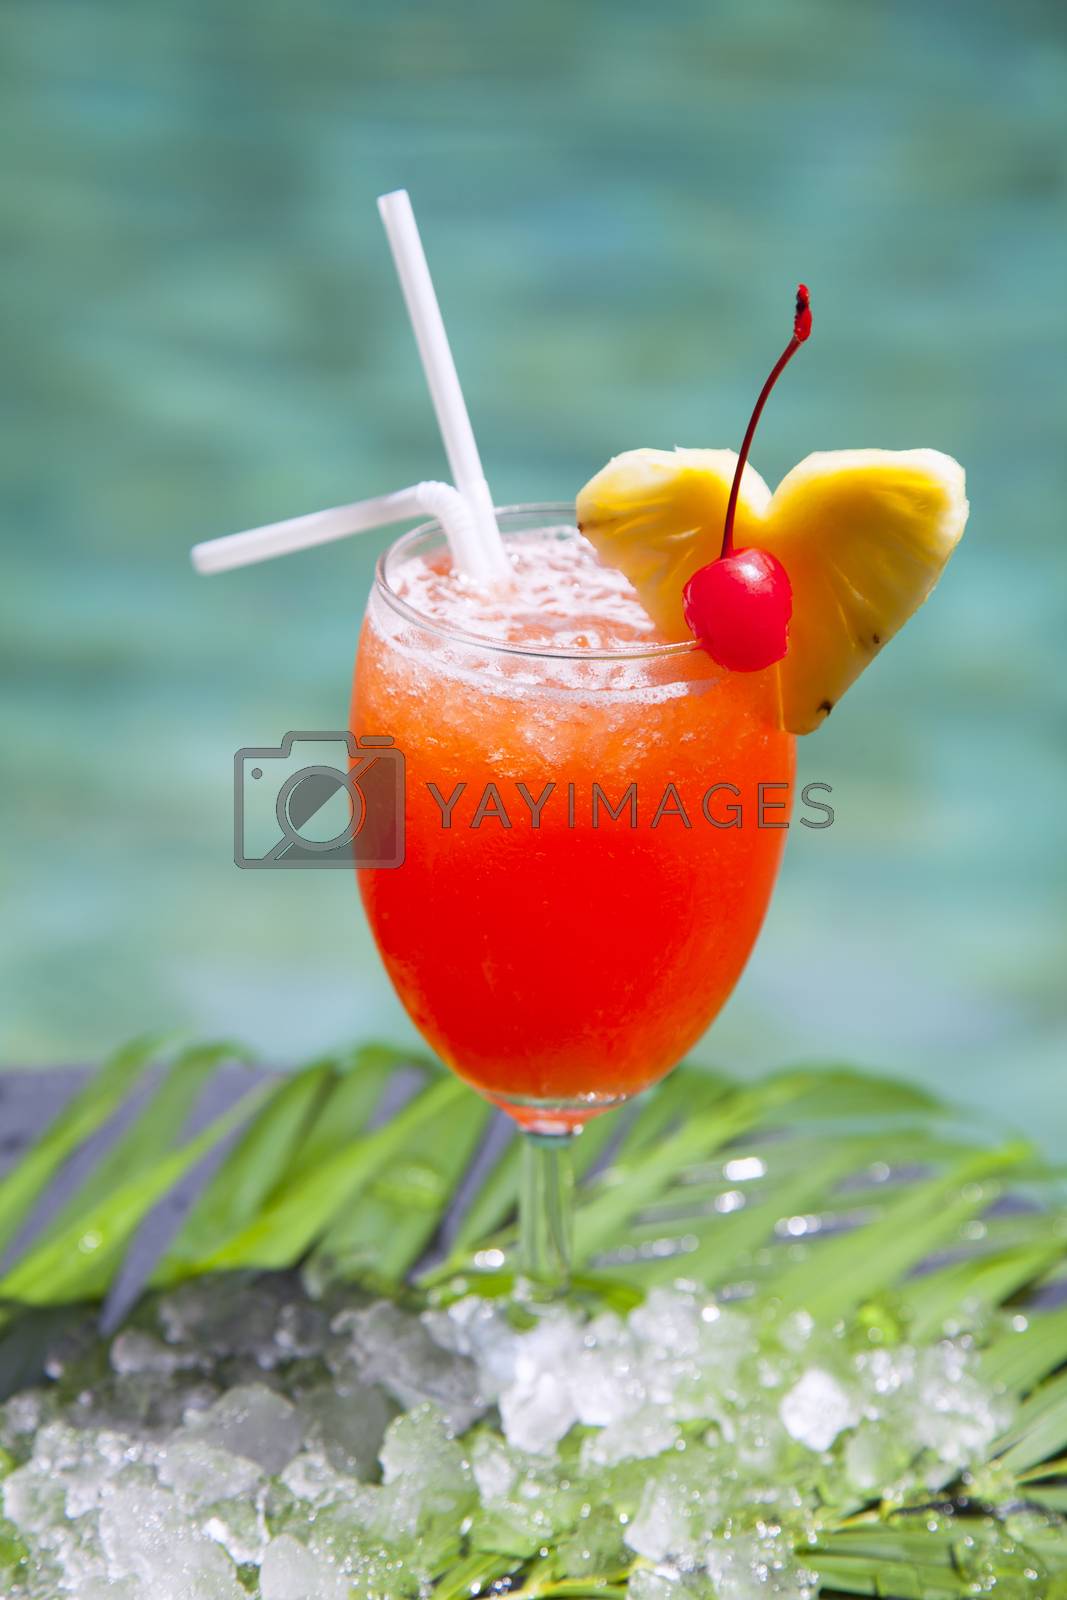 Royalty free image of Ice cocktail cosmopolitan. by jee1999